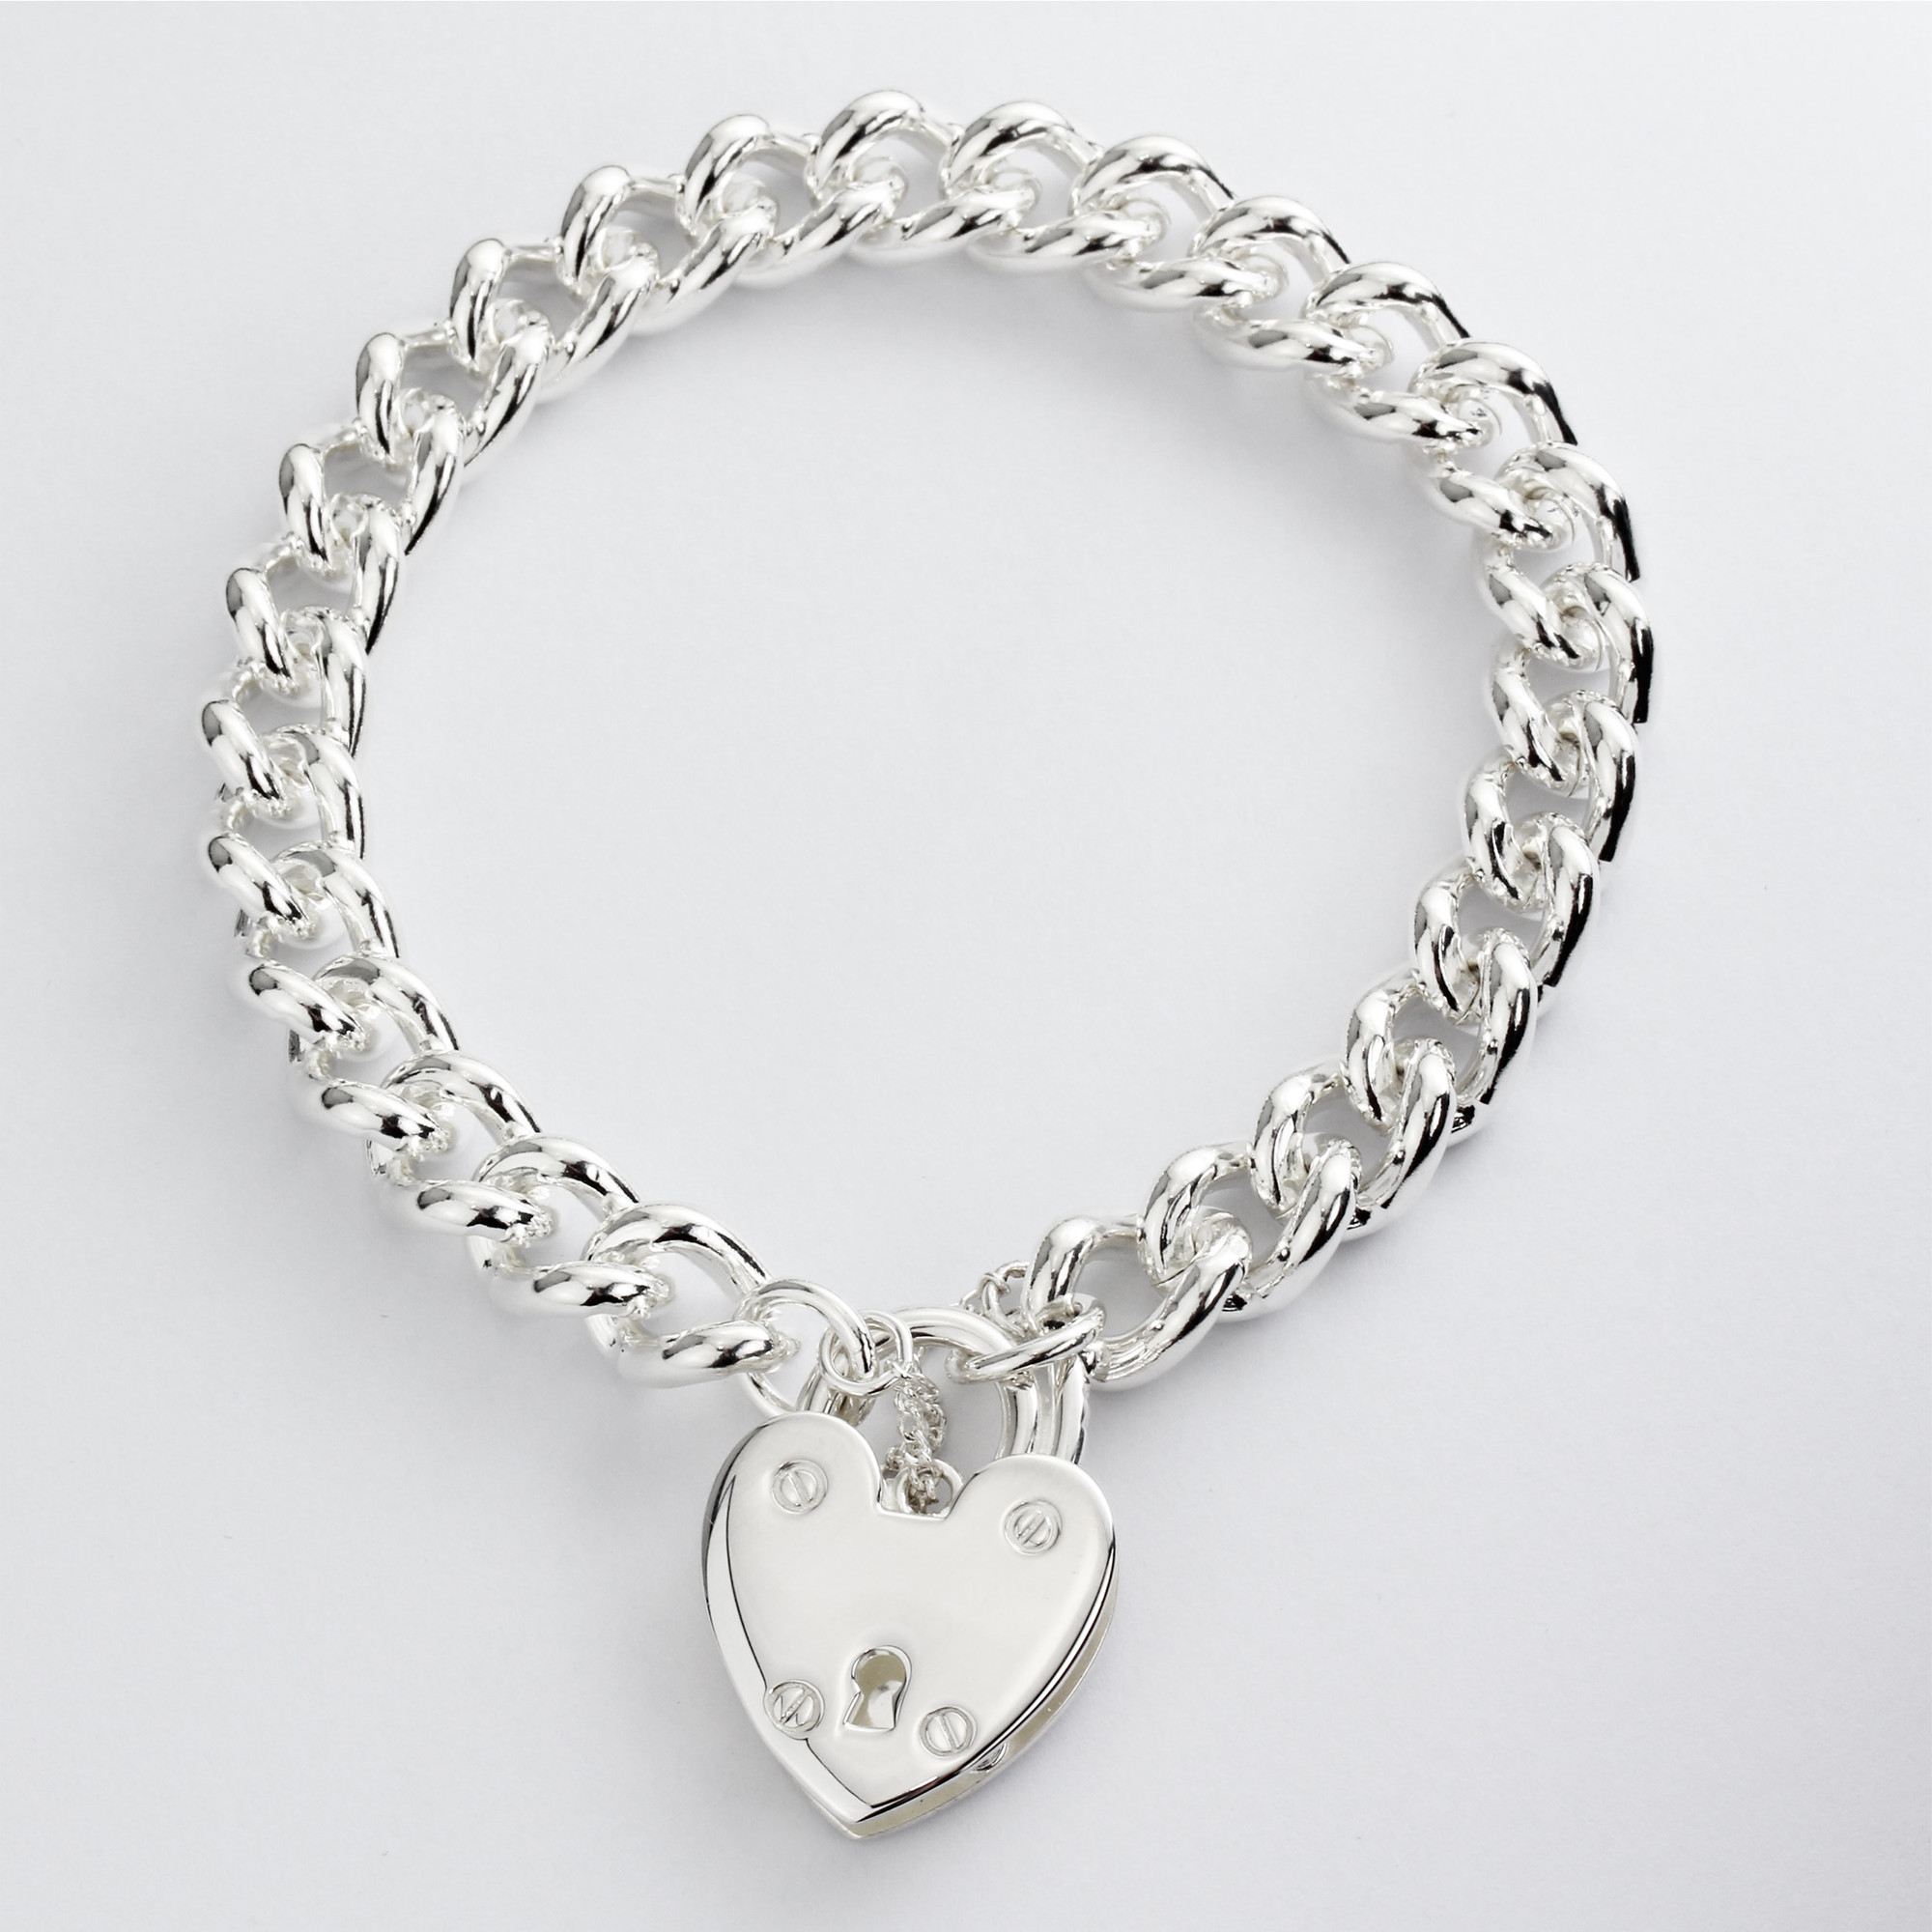 Heavy Solid Silver Charm Bracelet With Large Padlock Closure